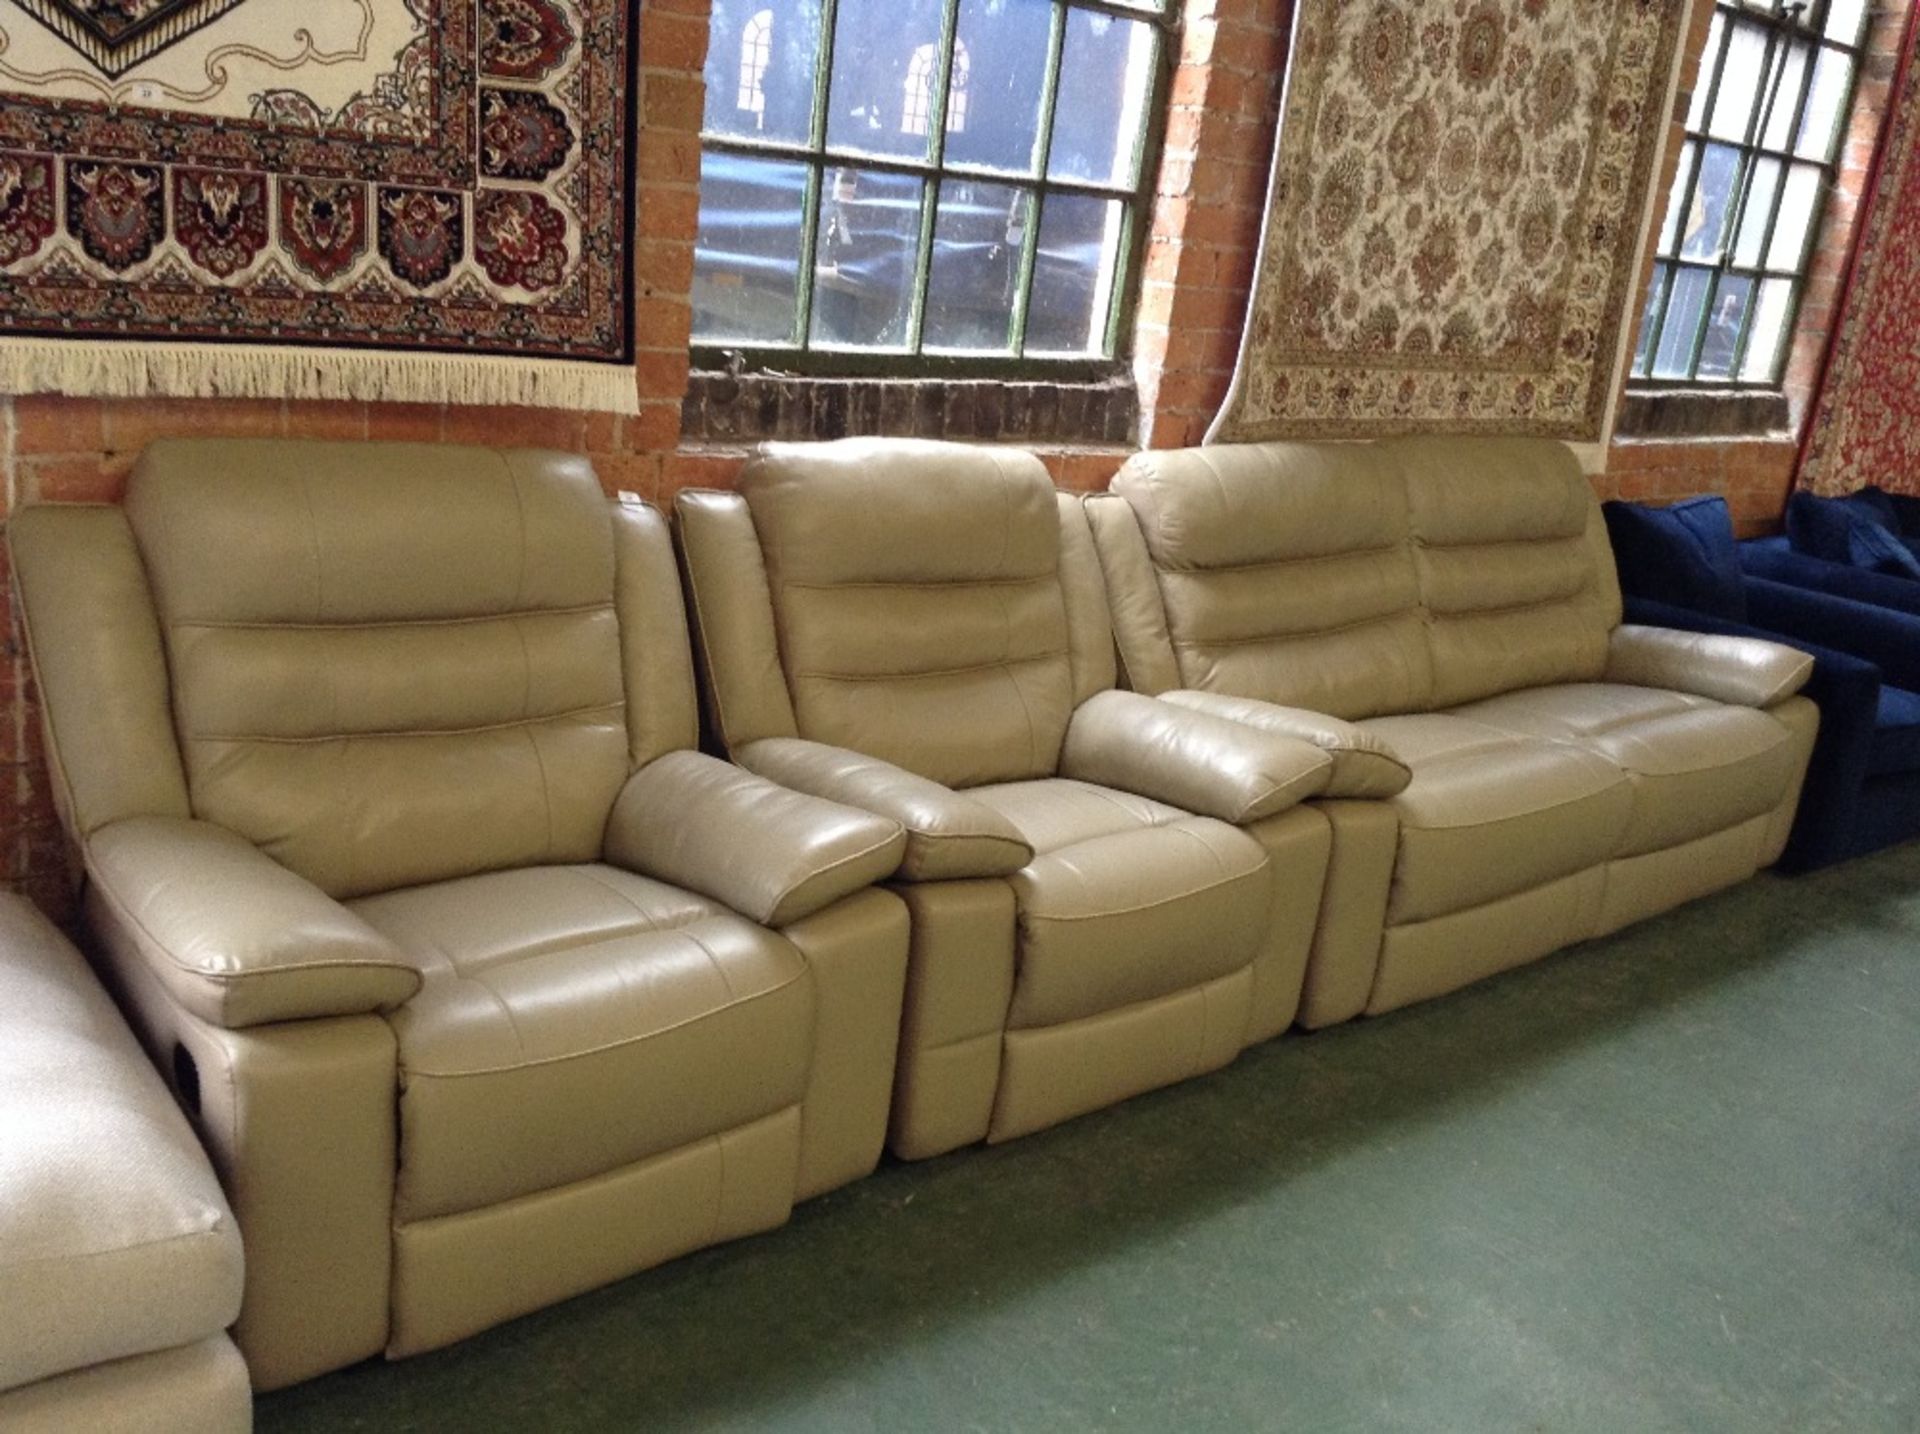 CREAM LEATHER 3 SEATER SOFA AND 2 MANUAL RECLINING